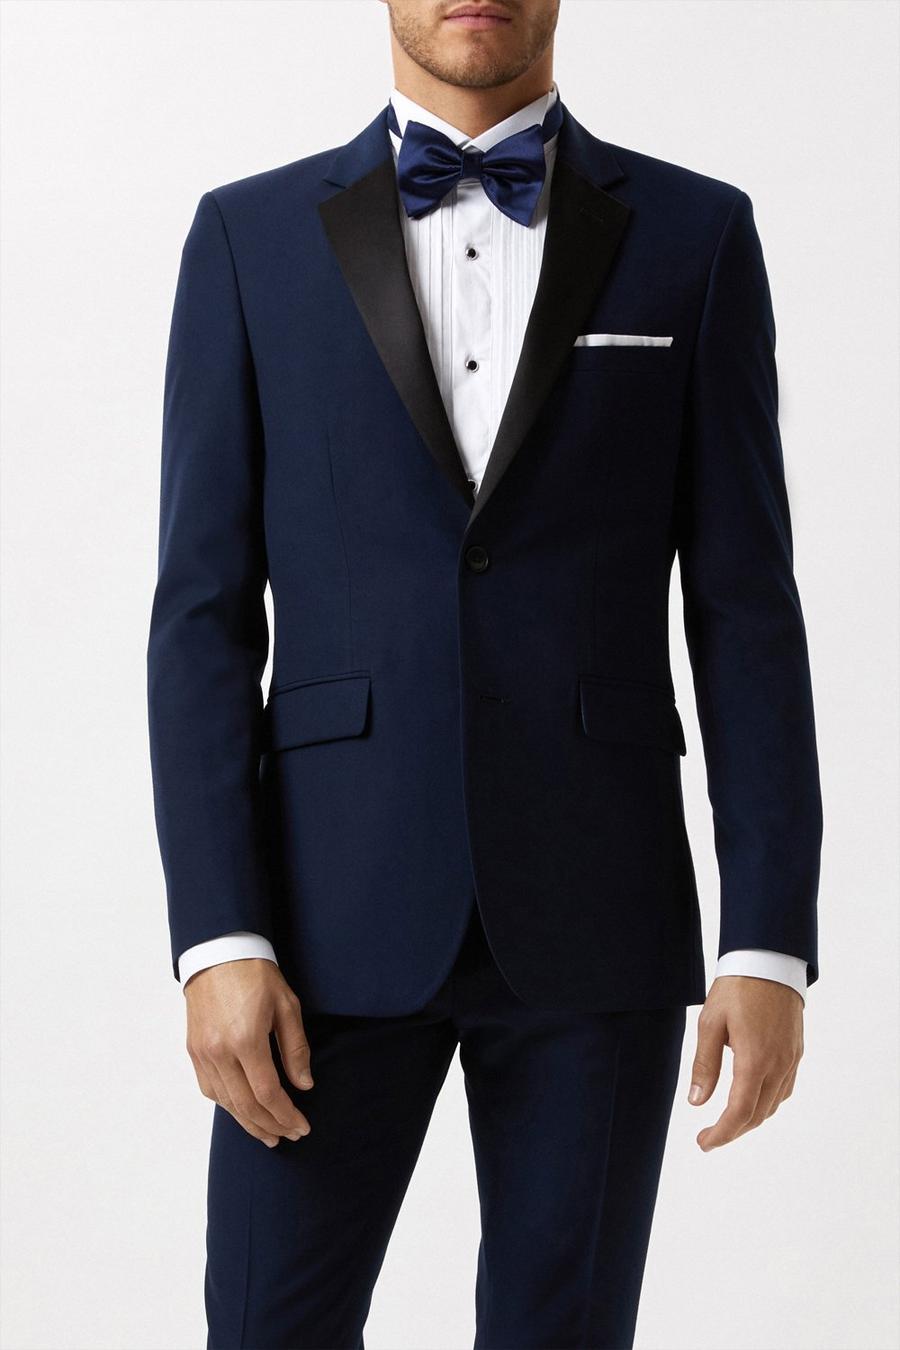 Skinny Fit Navy Tuxedo Two-Piece Suit